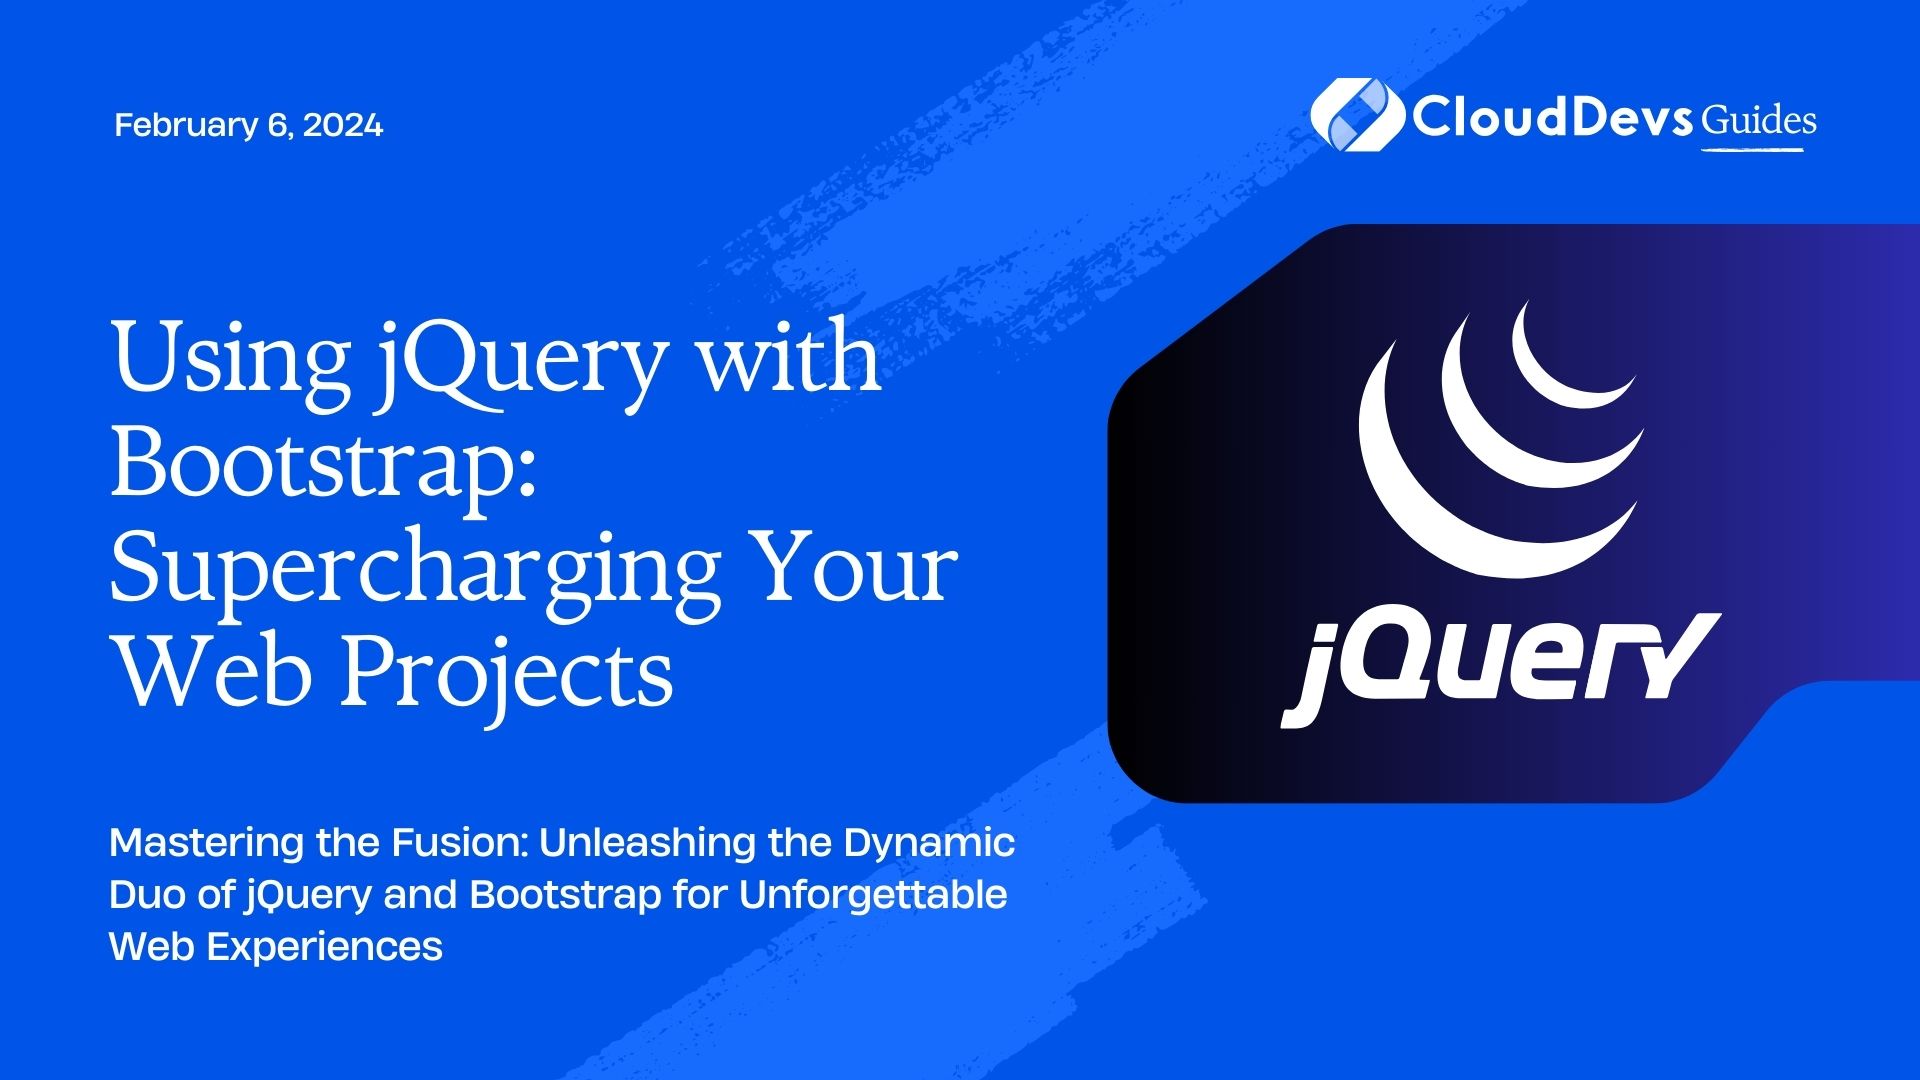 Using jQuery with Bootstrap: Supercharging Your Web Projects